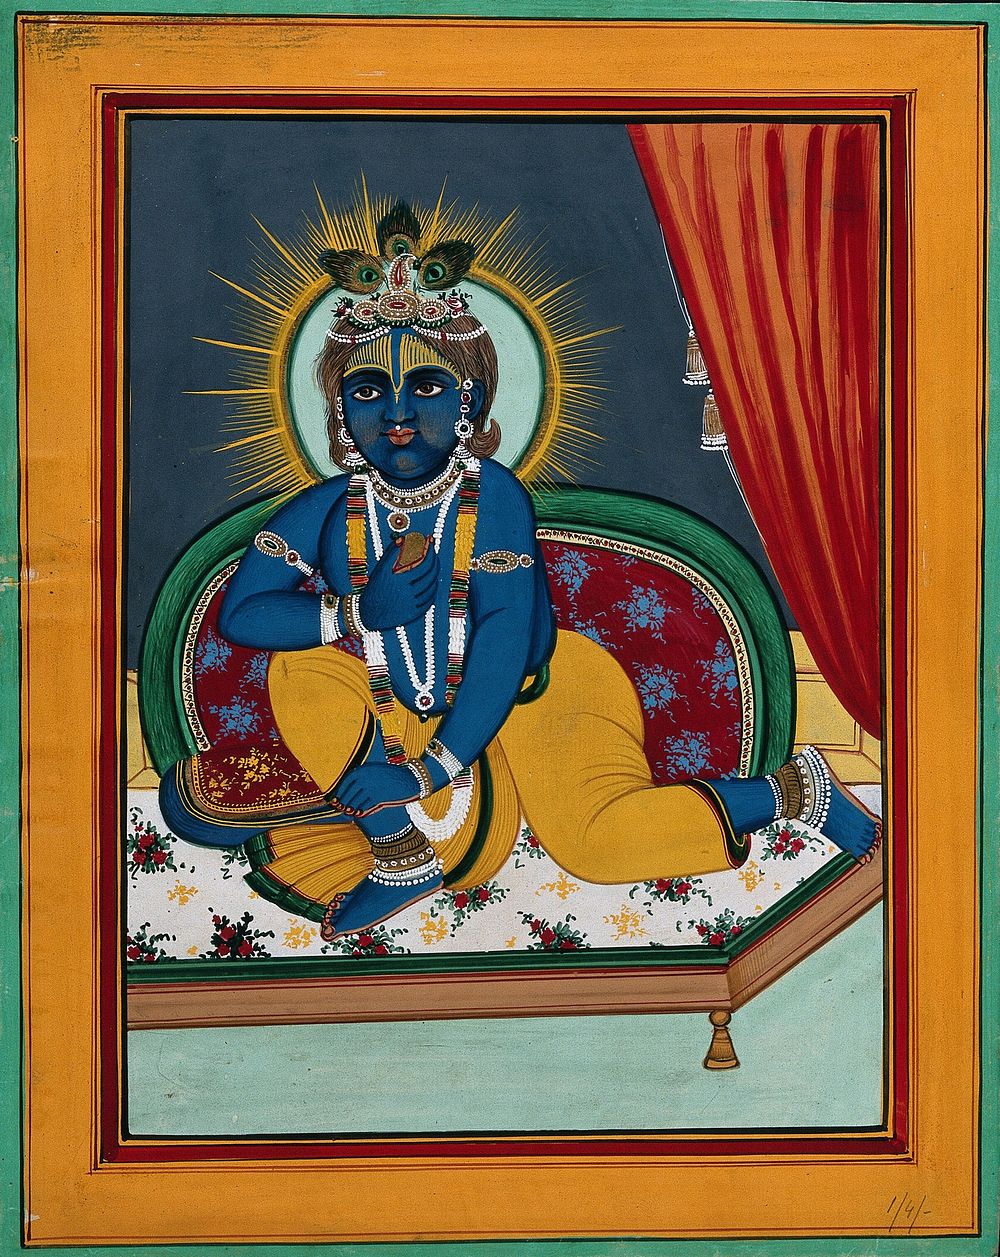 Krishna as a child. Painting by an Indian artist, 1800s.